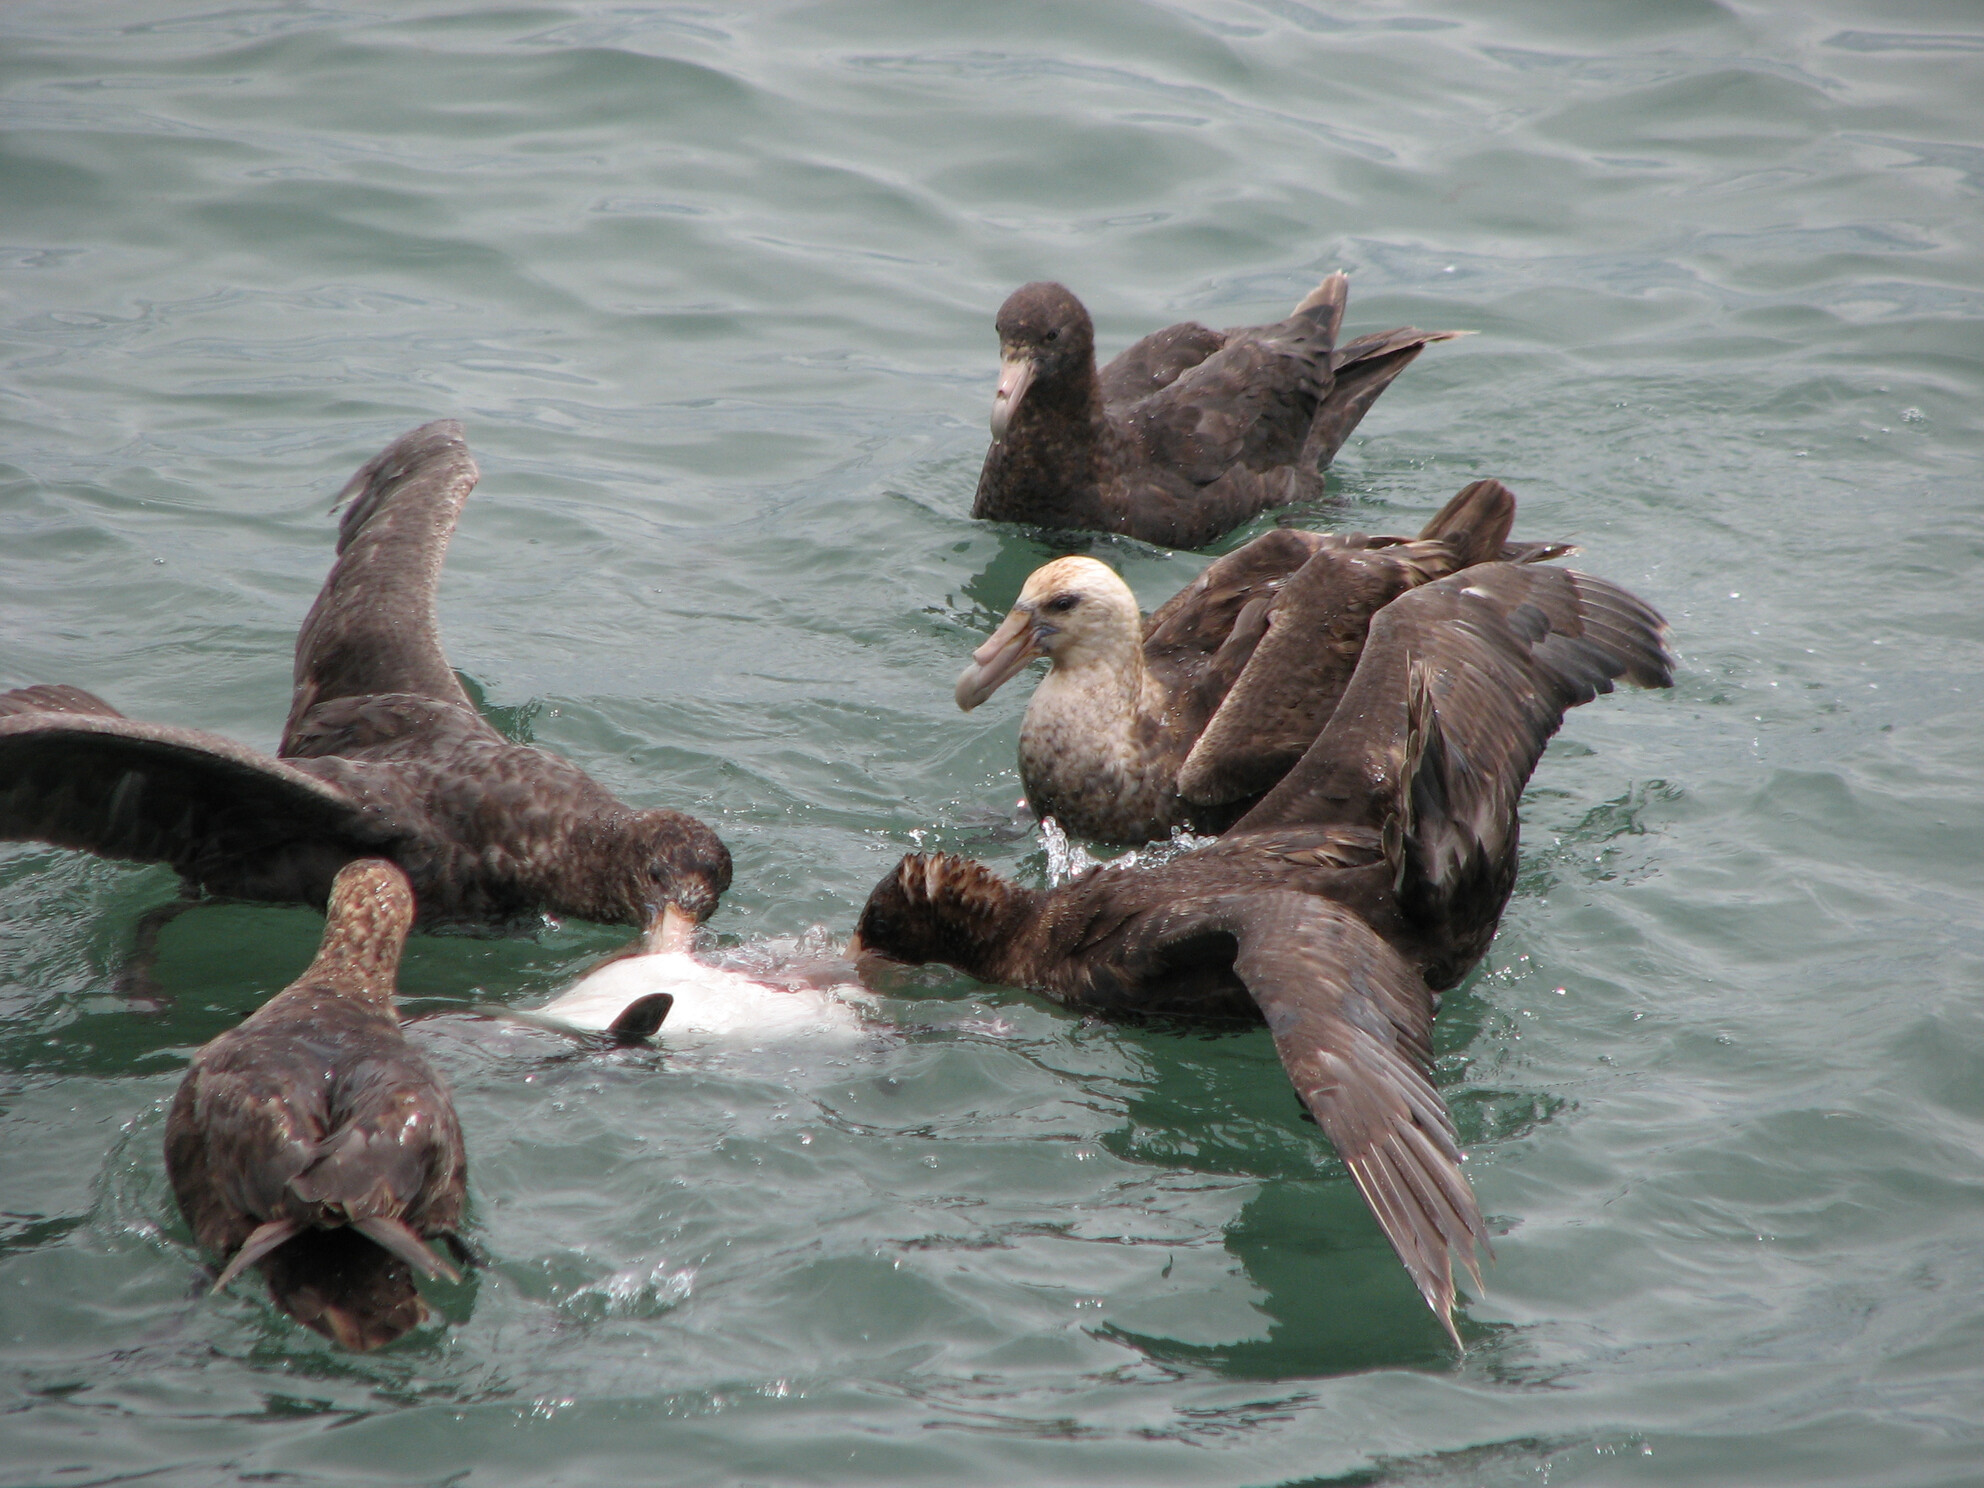 A fearful scourge to the penguin colonies: Southern giant petrel (Macronectes giganteus) predation on living Magellanic penguins (Spheniscus magellanicus) may be more common than assumed